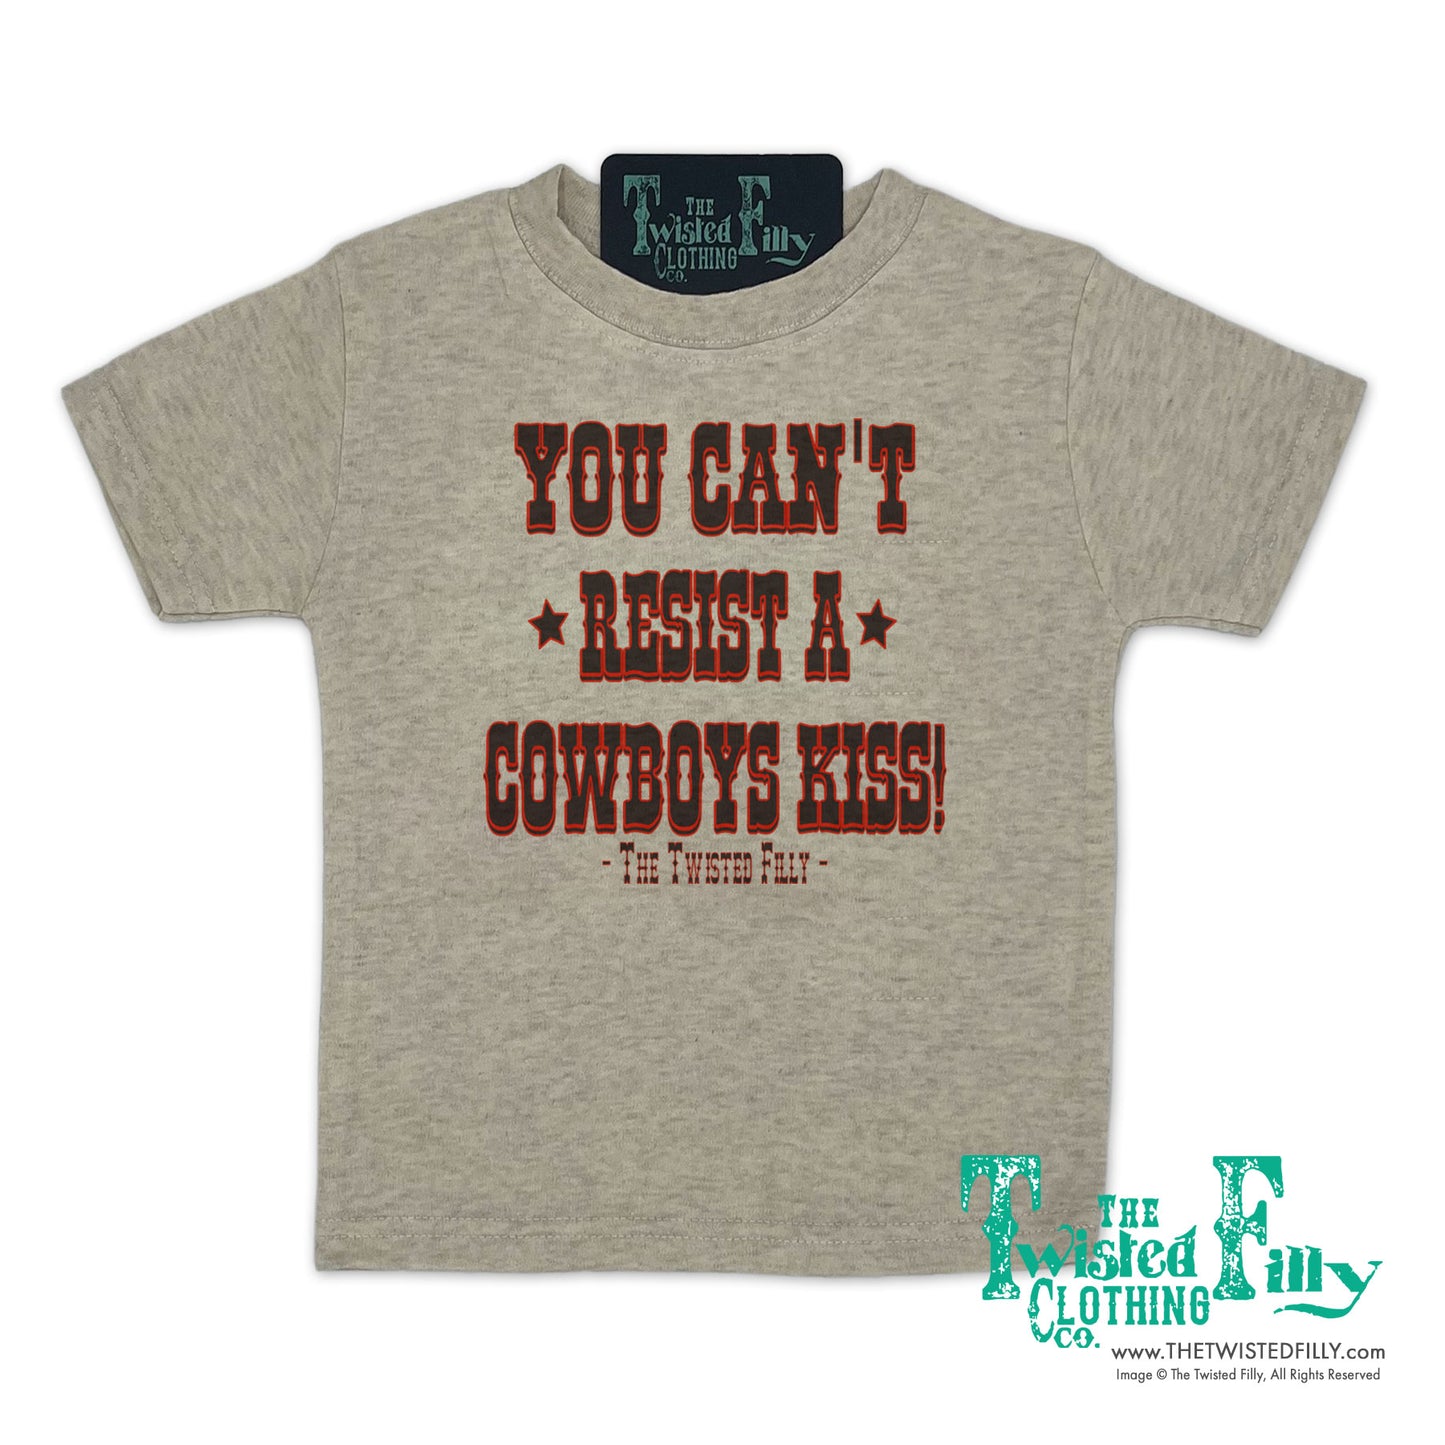 You Can't Resist A Cowboys Kiss - S/S Toddler Tee - Oatmeal